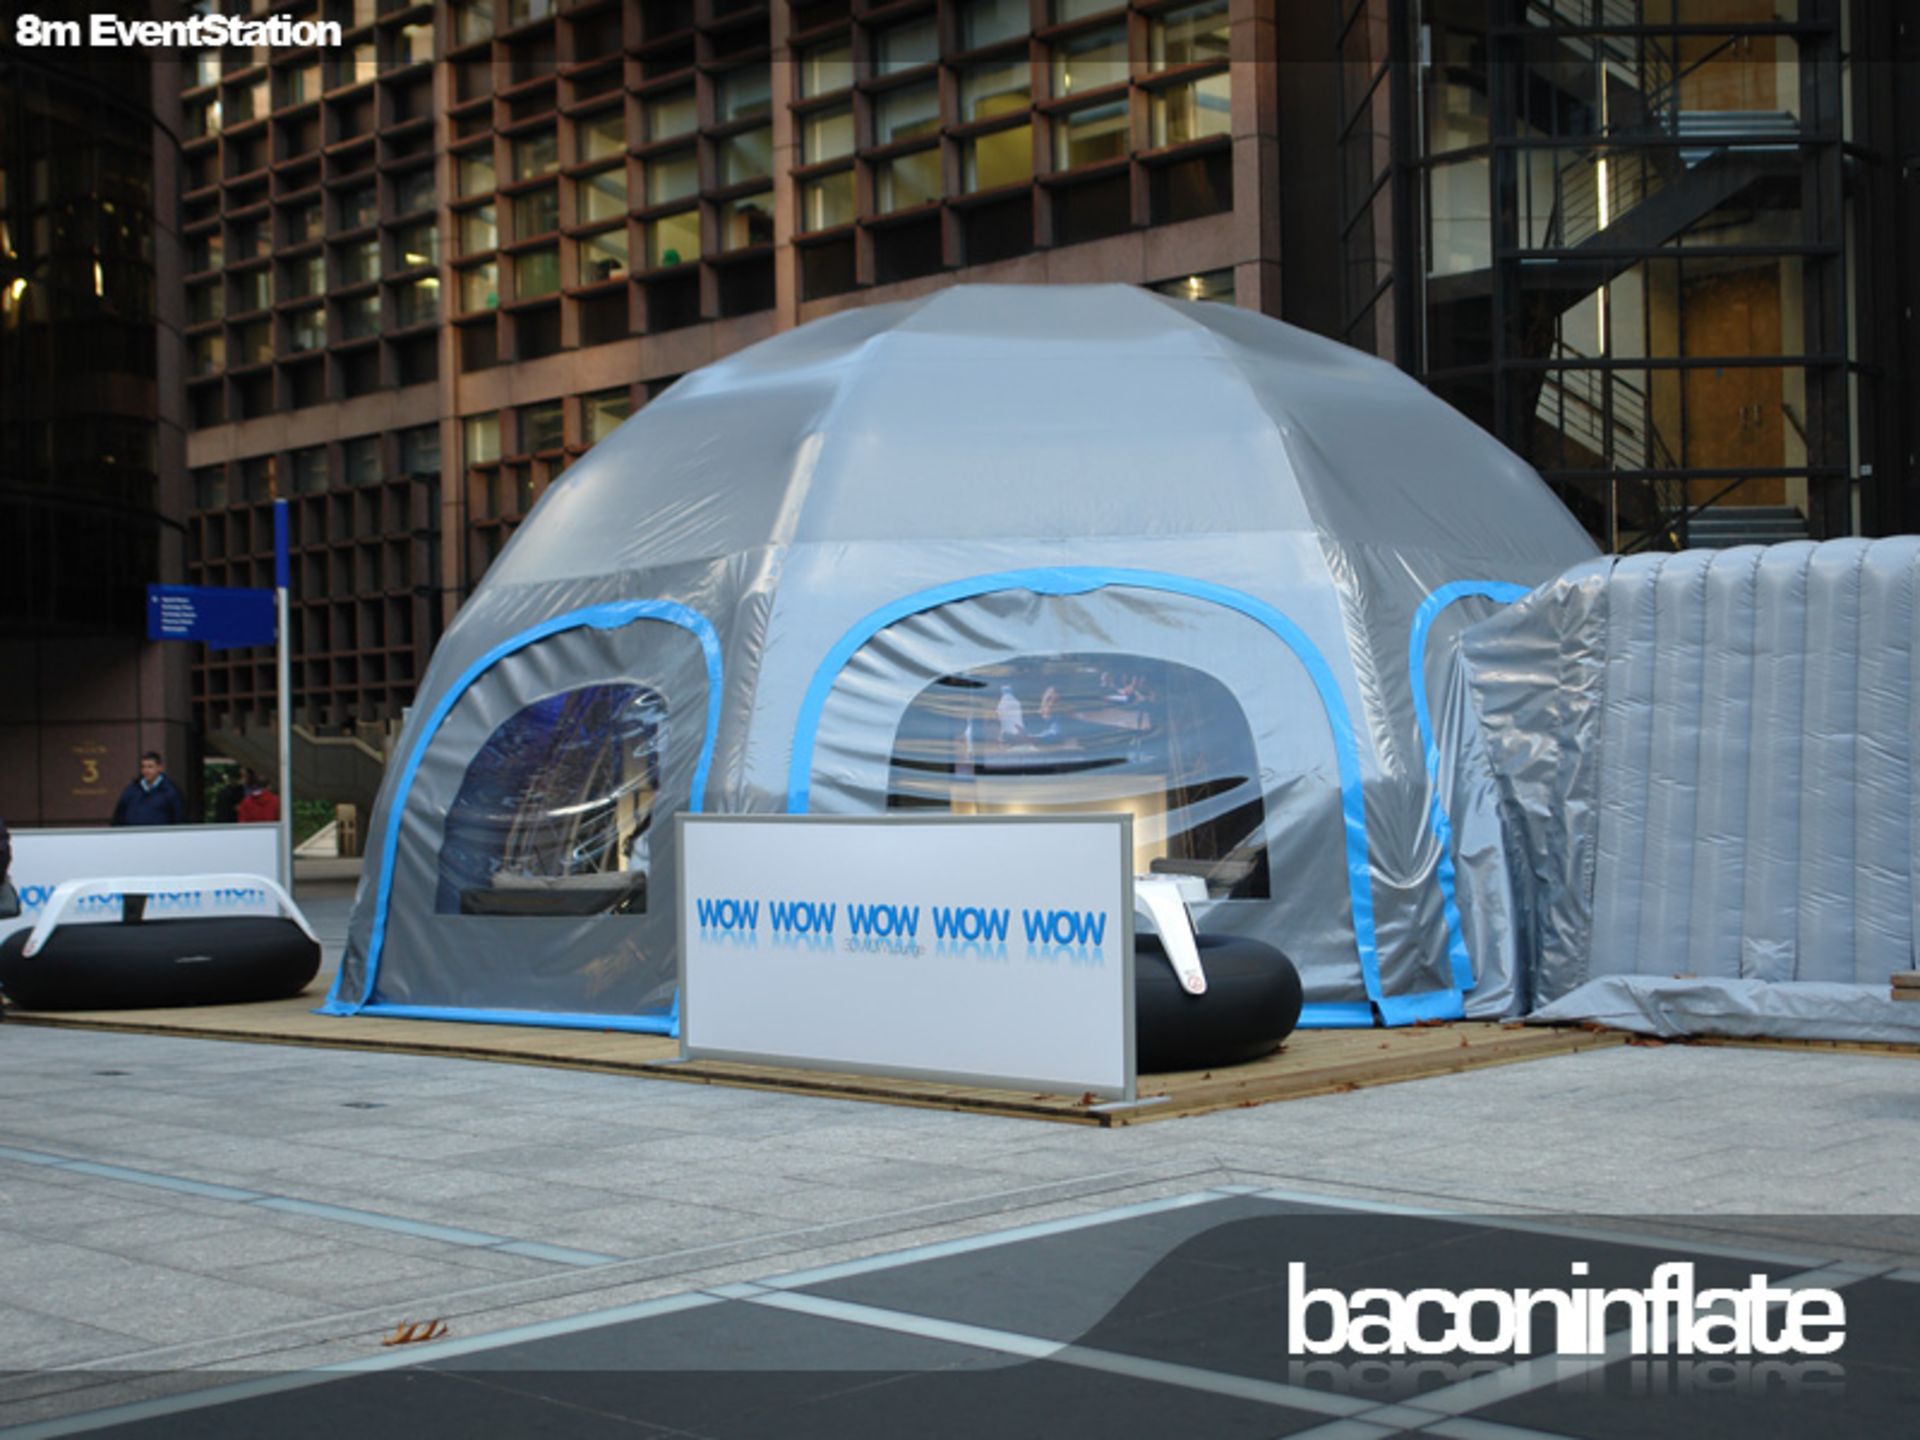 EventStation Leg Unit 8m Inflatable Structure with Canopy (2 Bags) (Stock No’s; BiES8/12 & BiES 8/ - Image 2 of 16